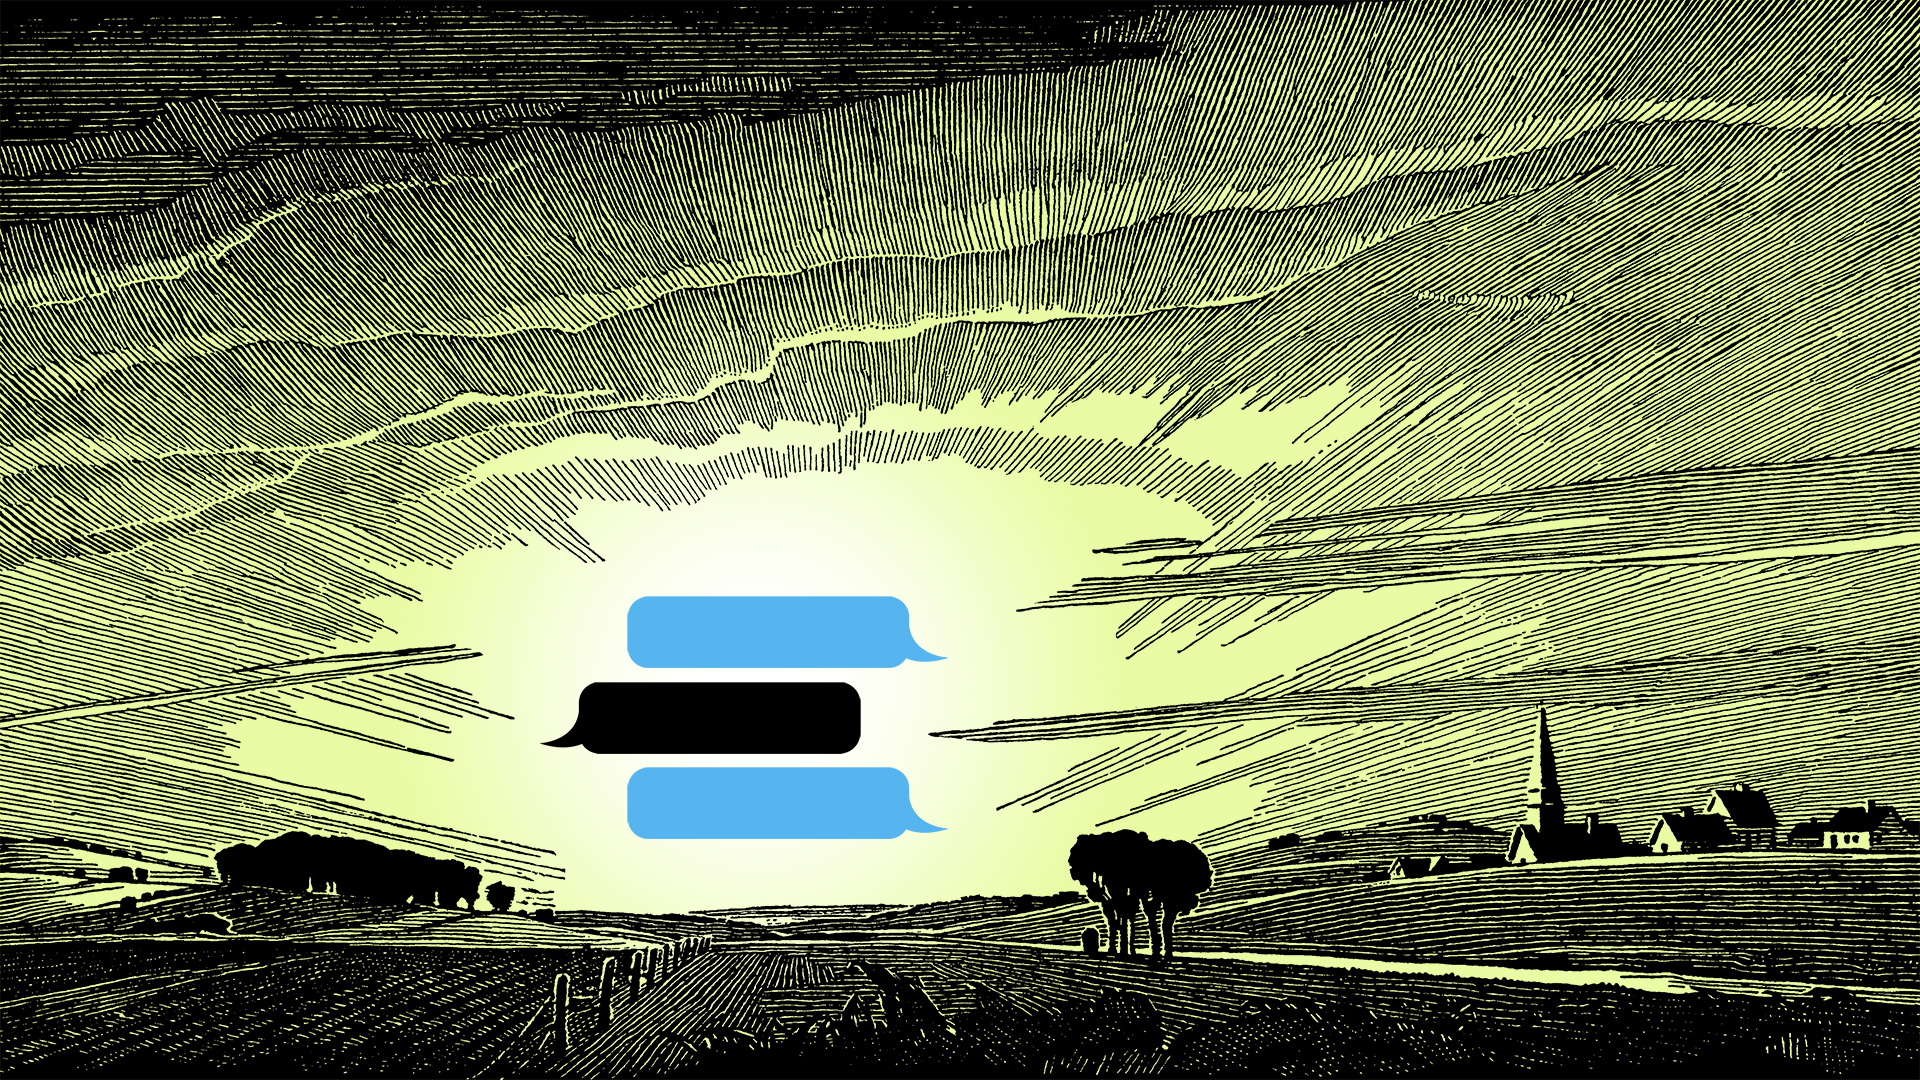 Three speech bubbles representing the OpenAI GPT chatbot store are floating above a horizon in an etched drawing of a countryside.